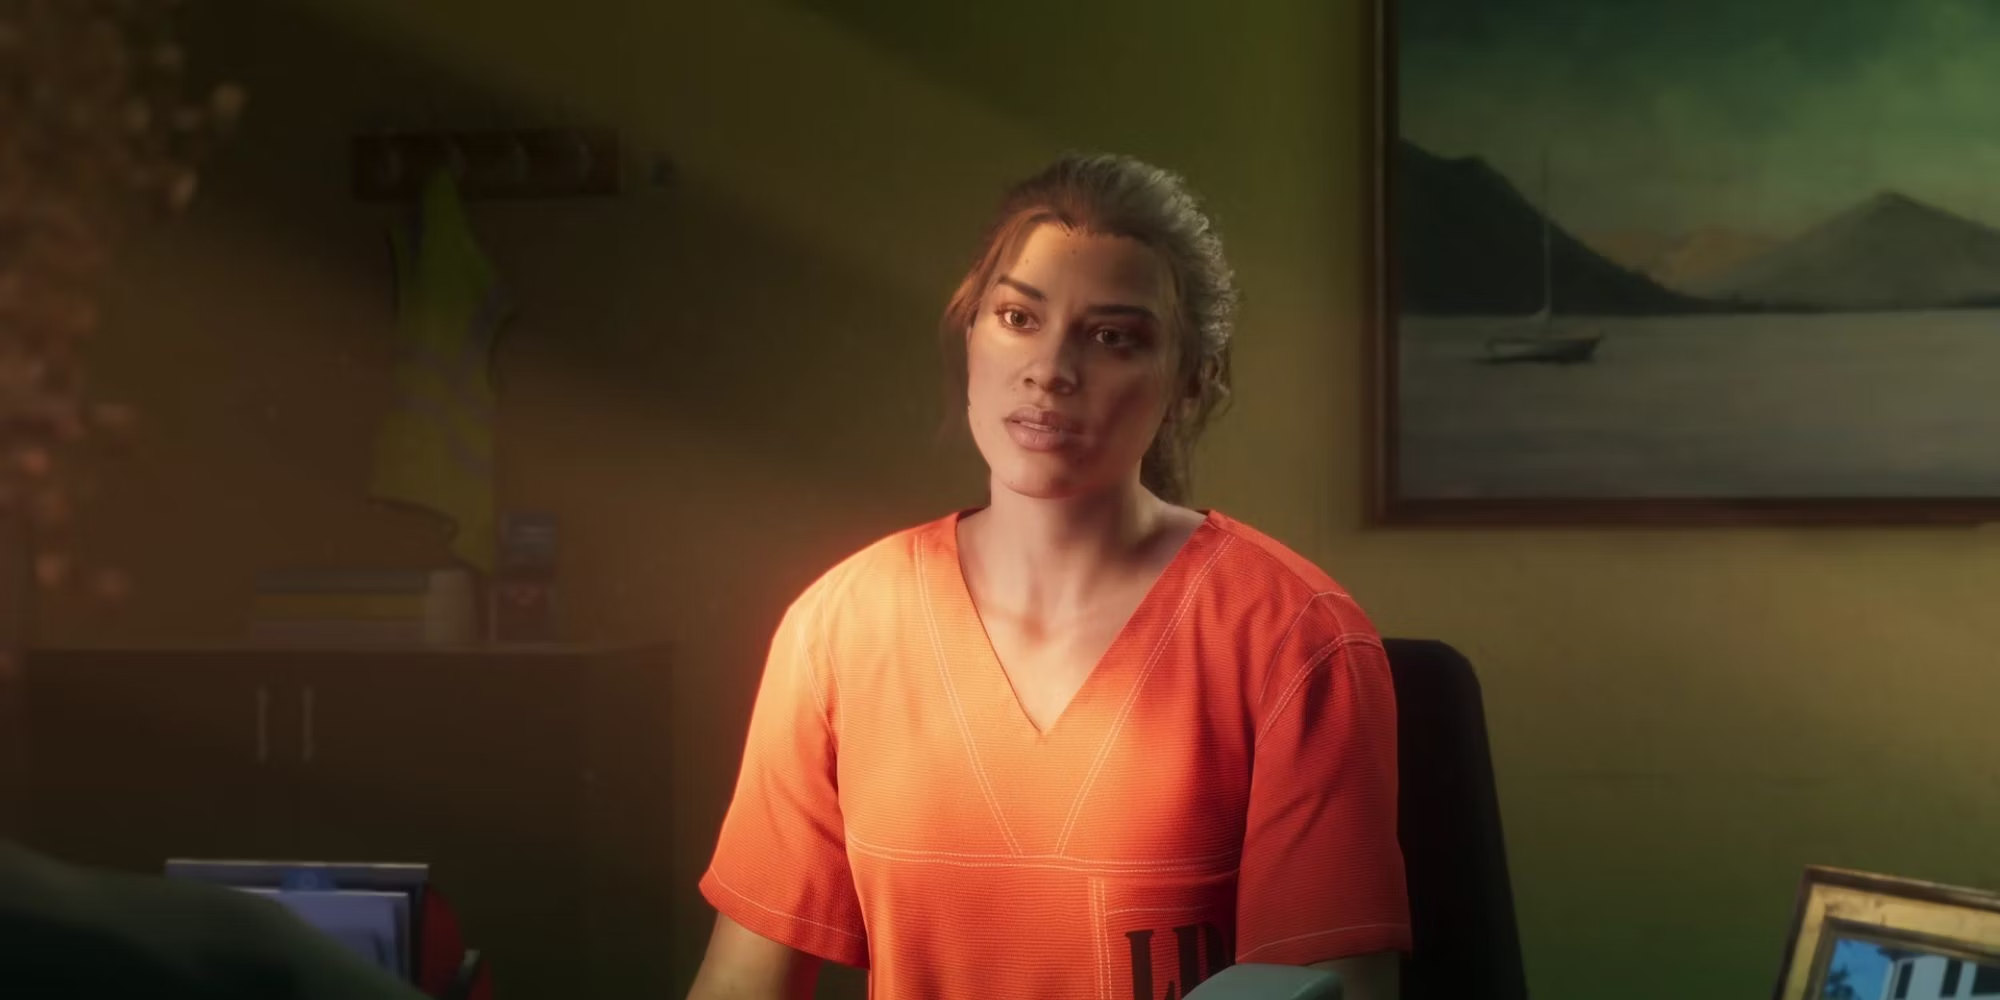 Fans seem to have found the actress who plays Lucia in GTA 6